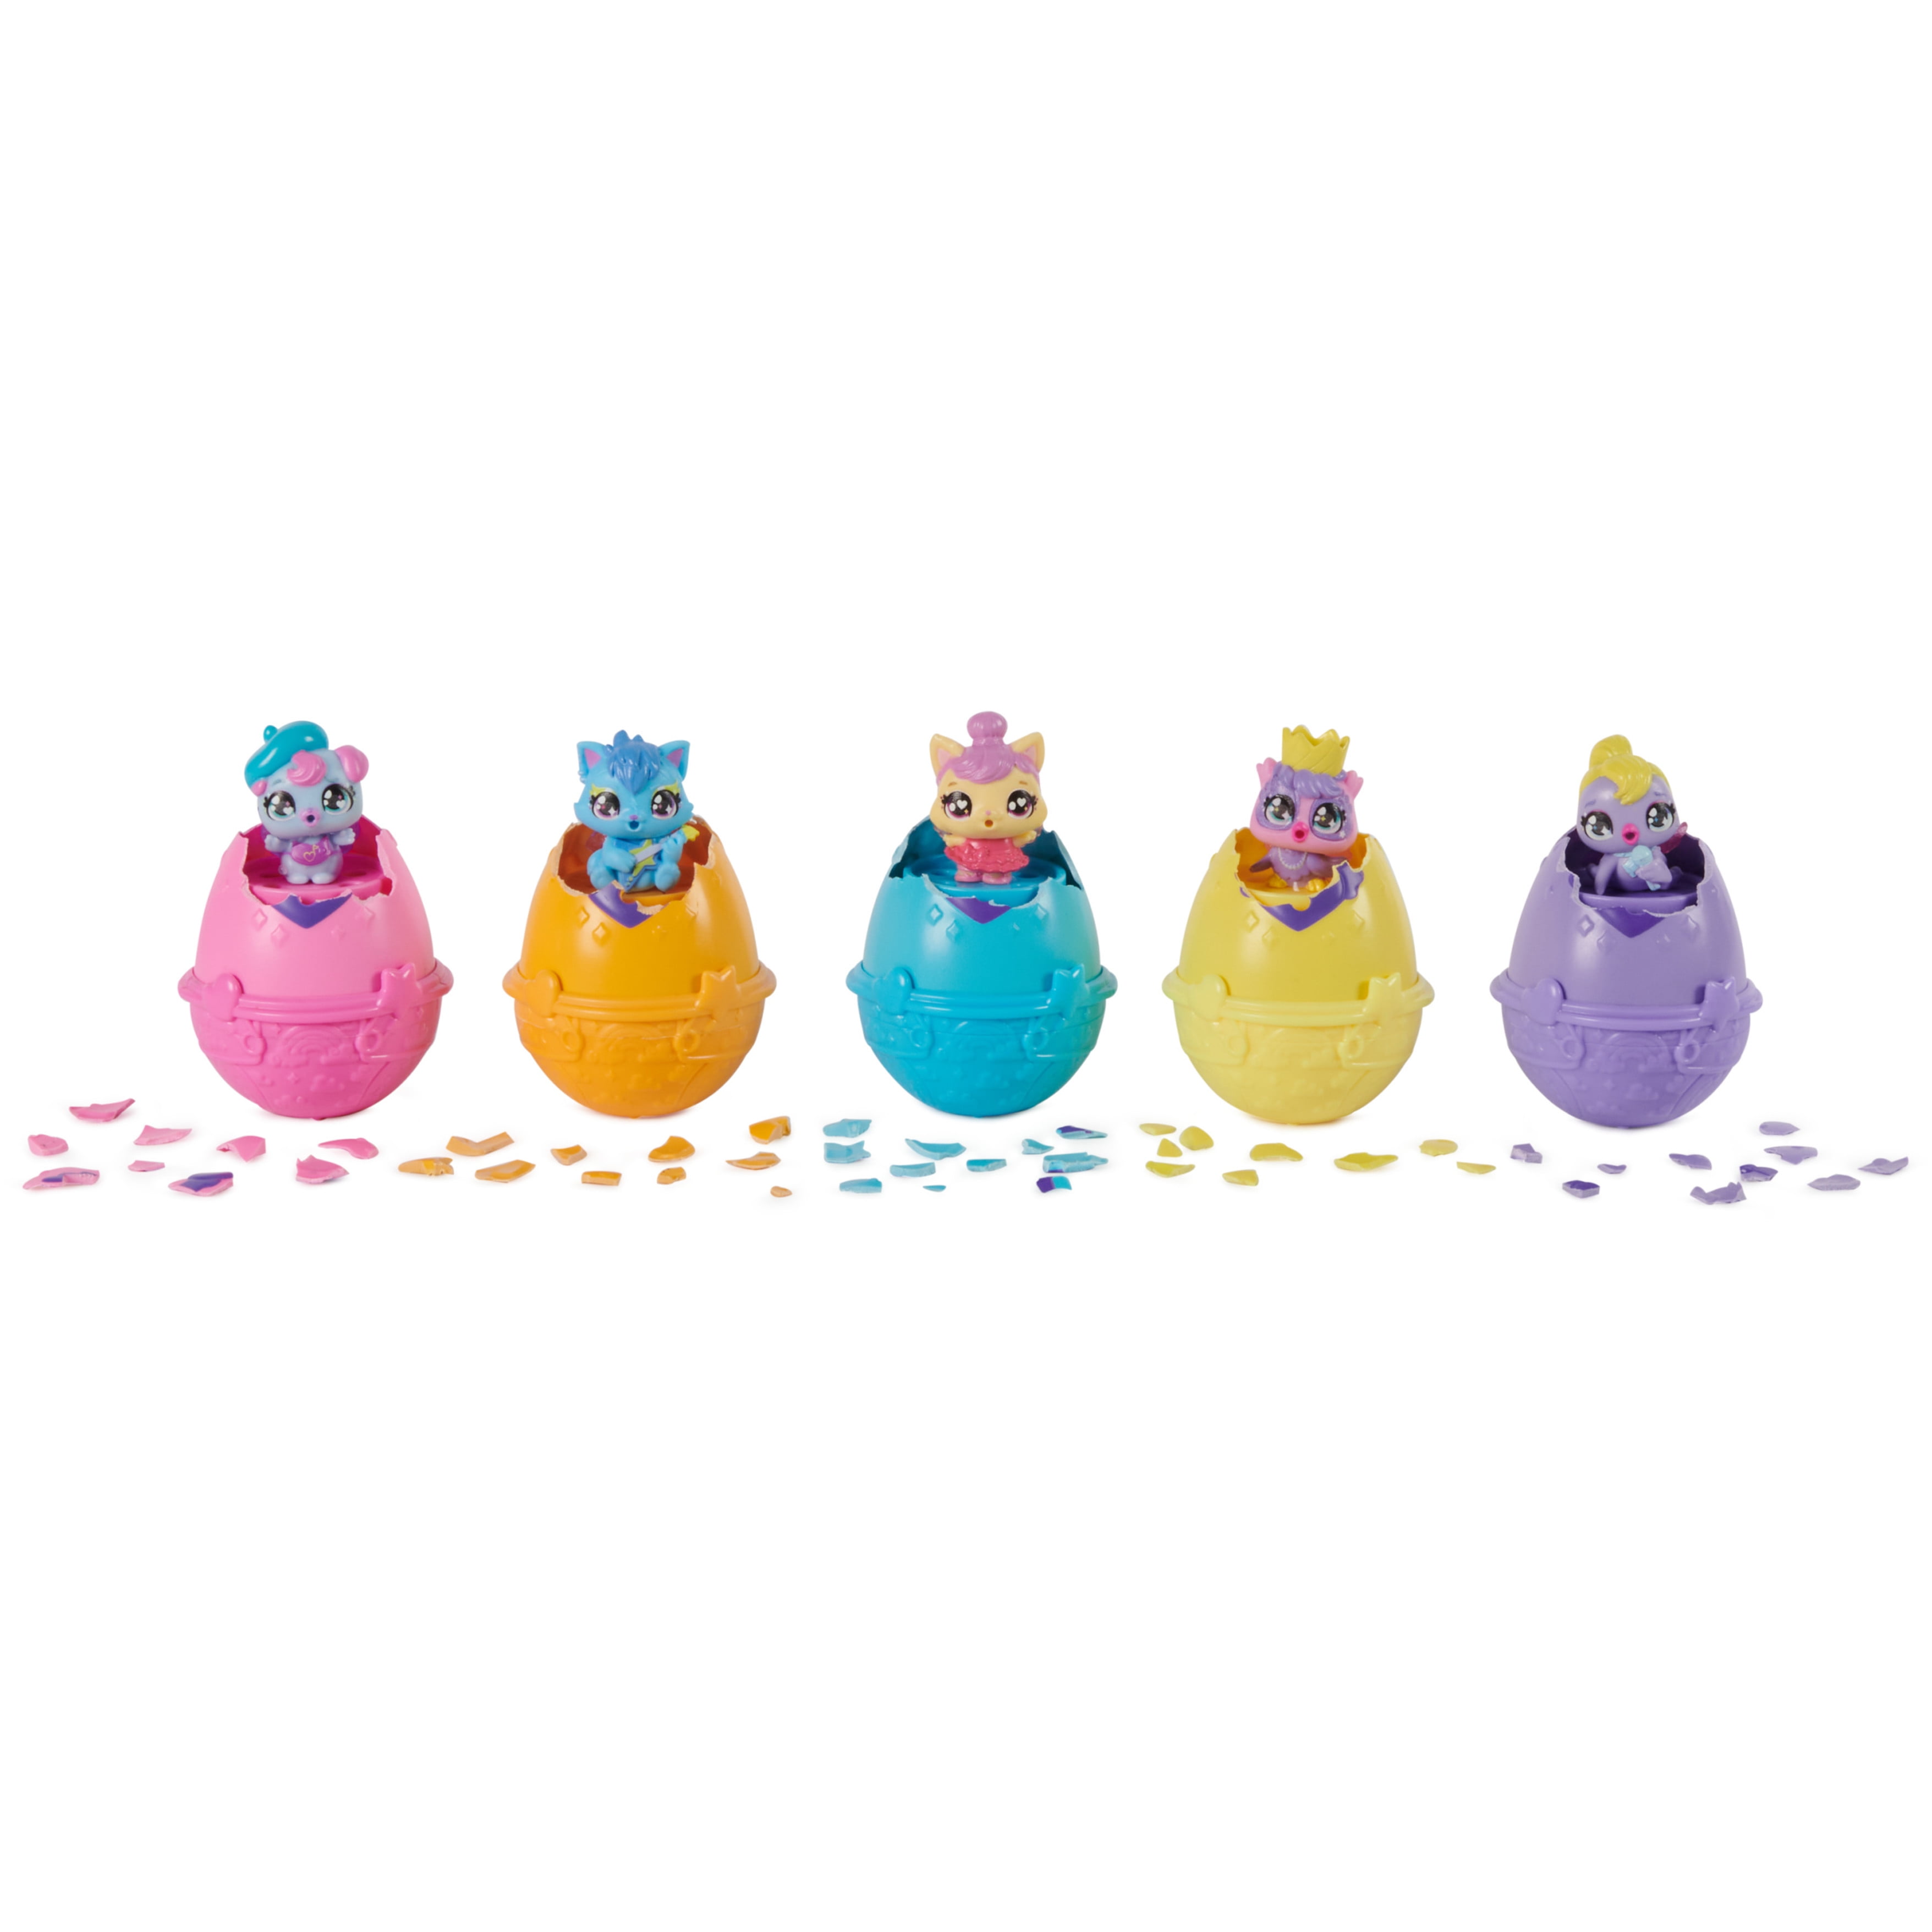 Hatchimals Alive, Egg Carton Toy with 5 Mini Figures in Self-Hatching Eggs,  11 Accessories, Kids Toys for Girls and Boys Ages 3 and up